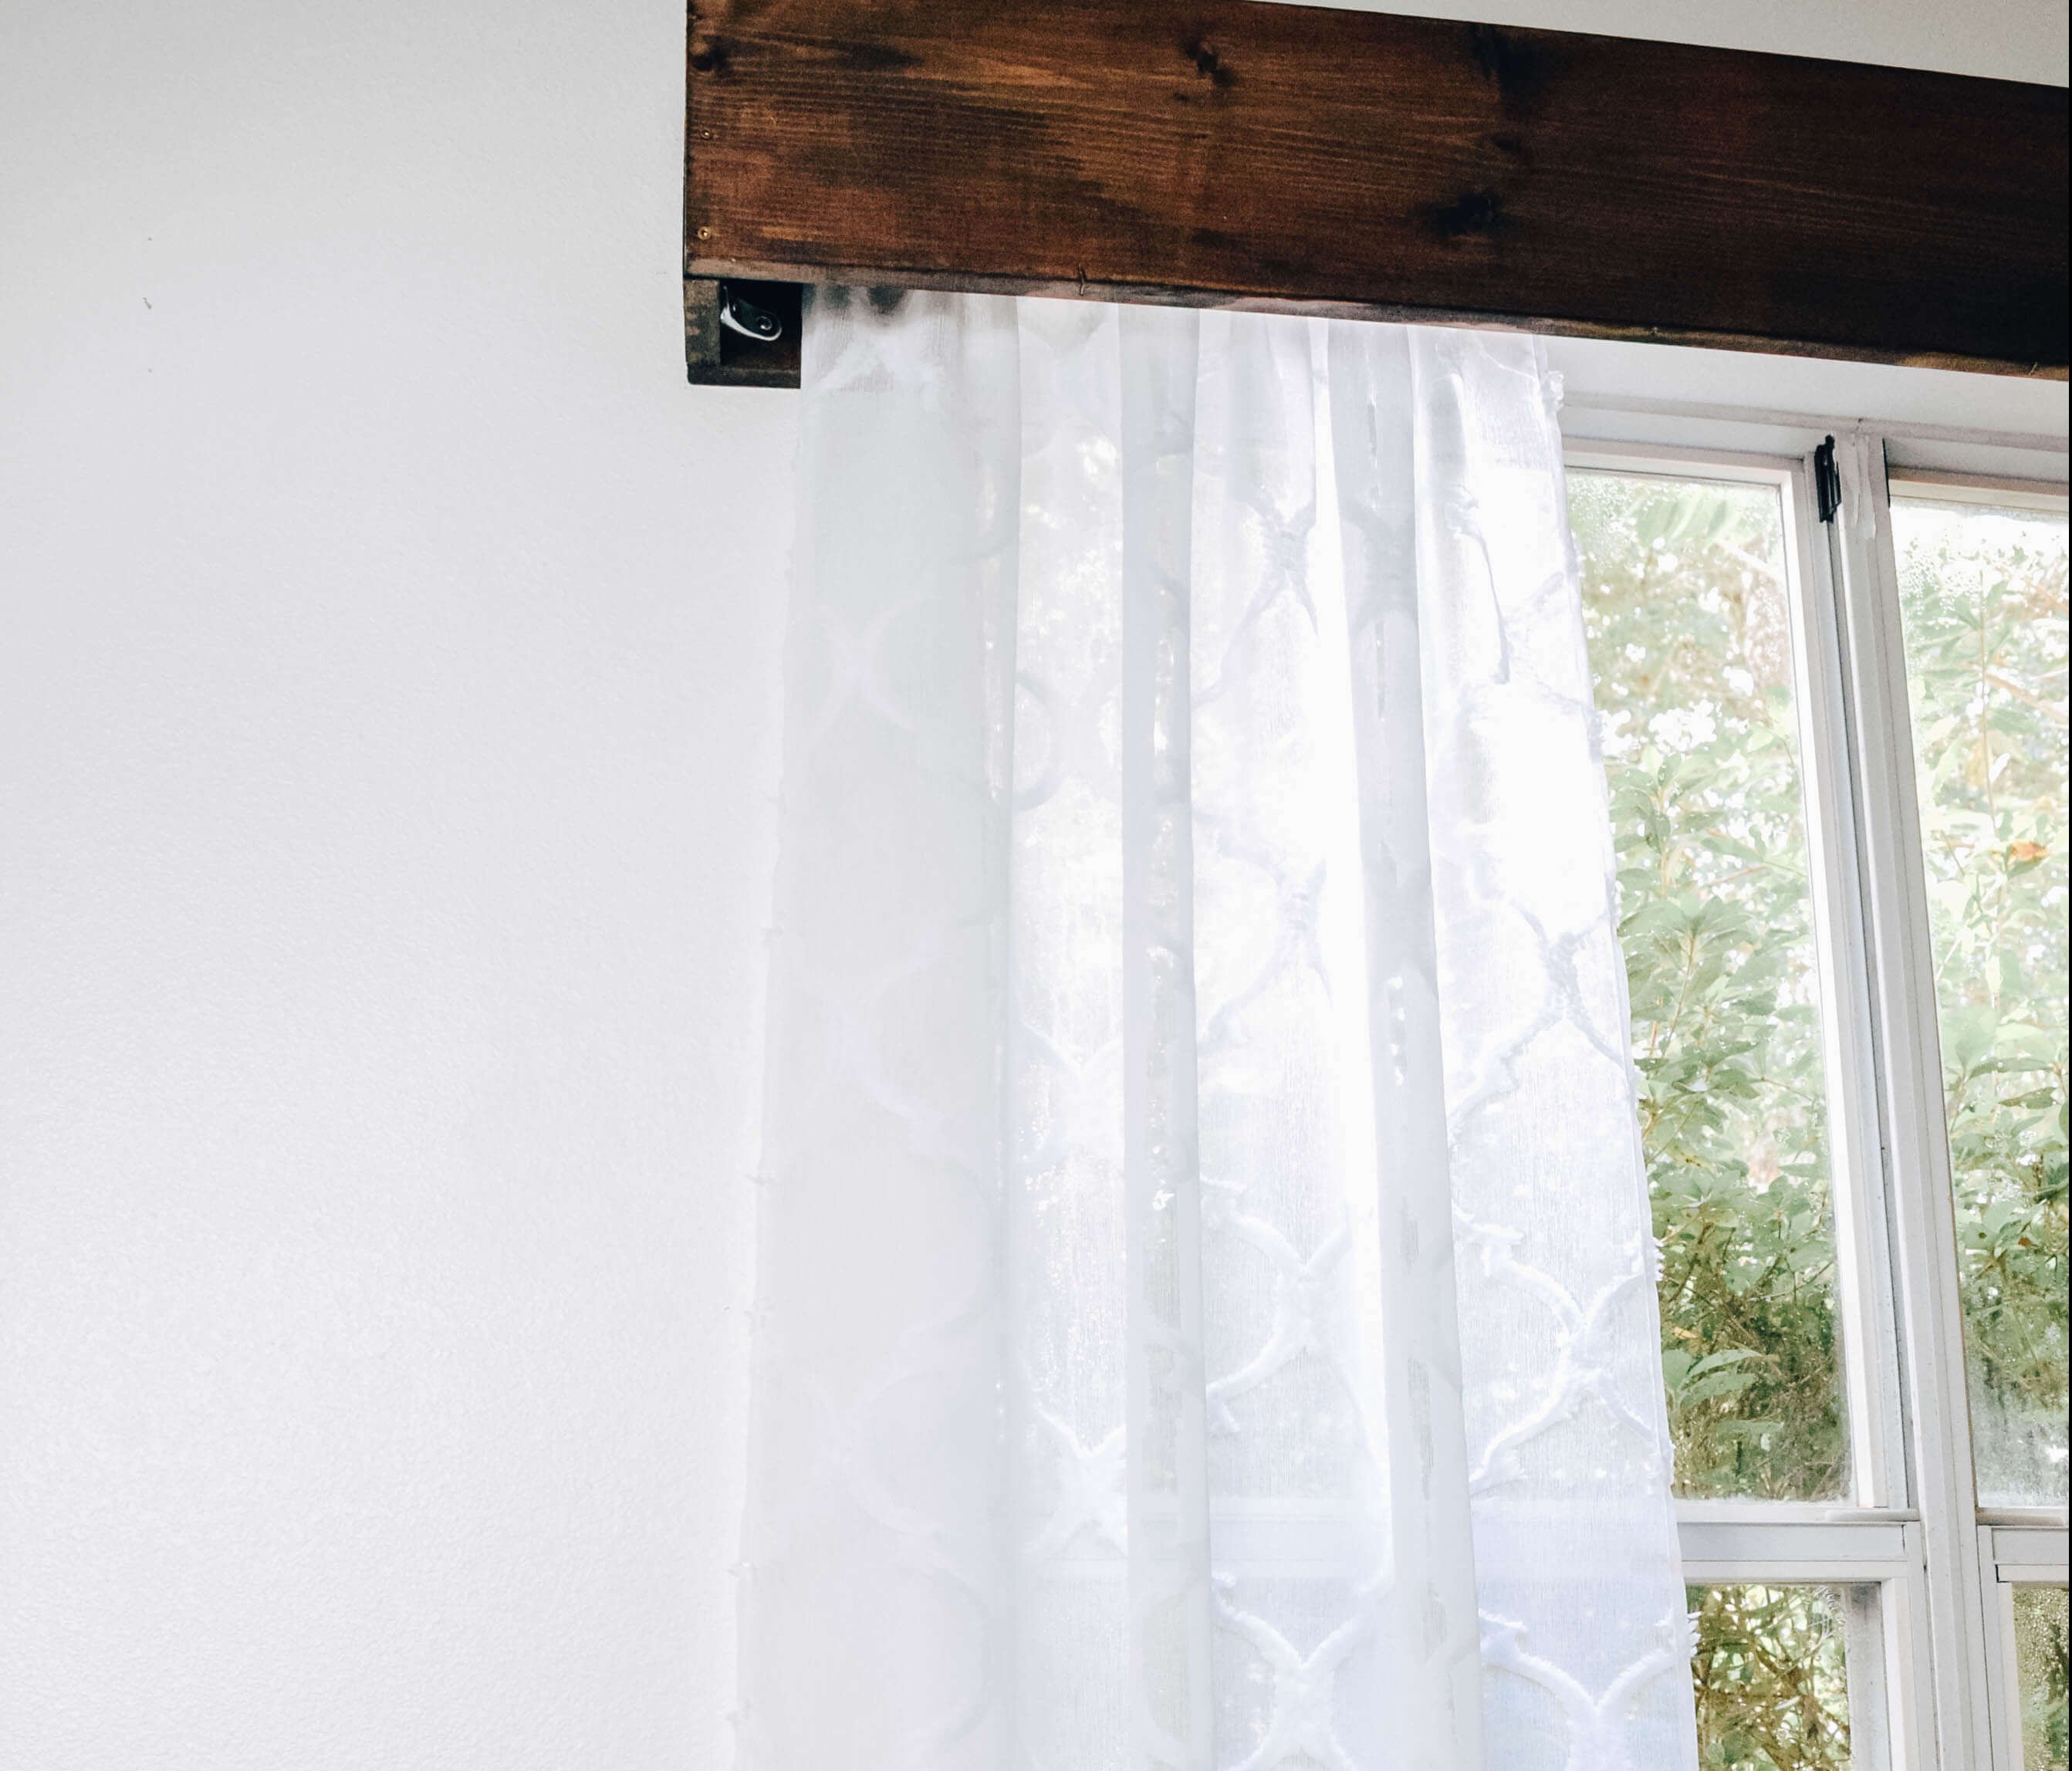 How to Make Your Own Wood Window Valence with Curtains